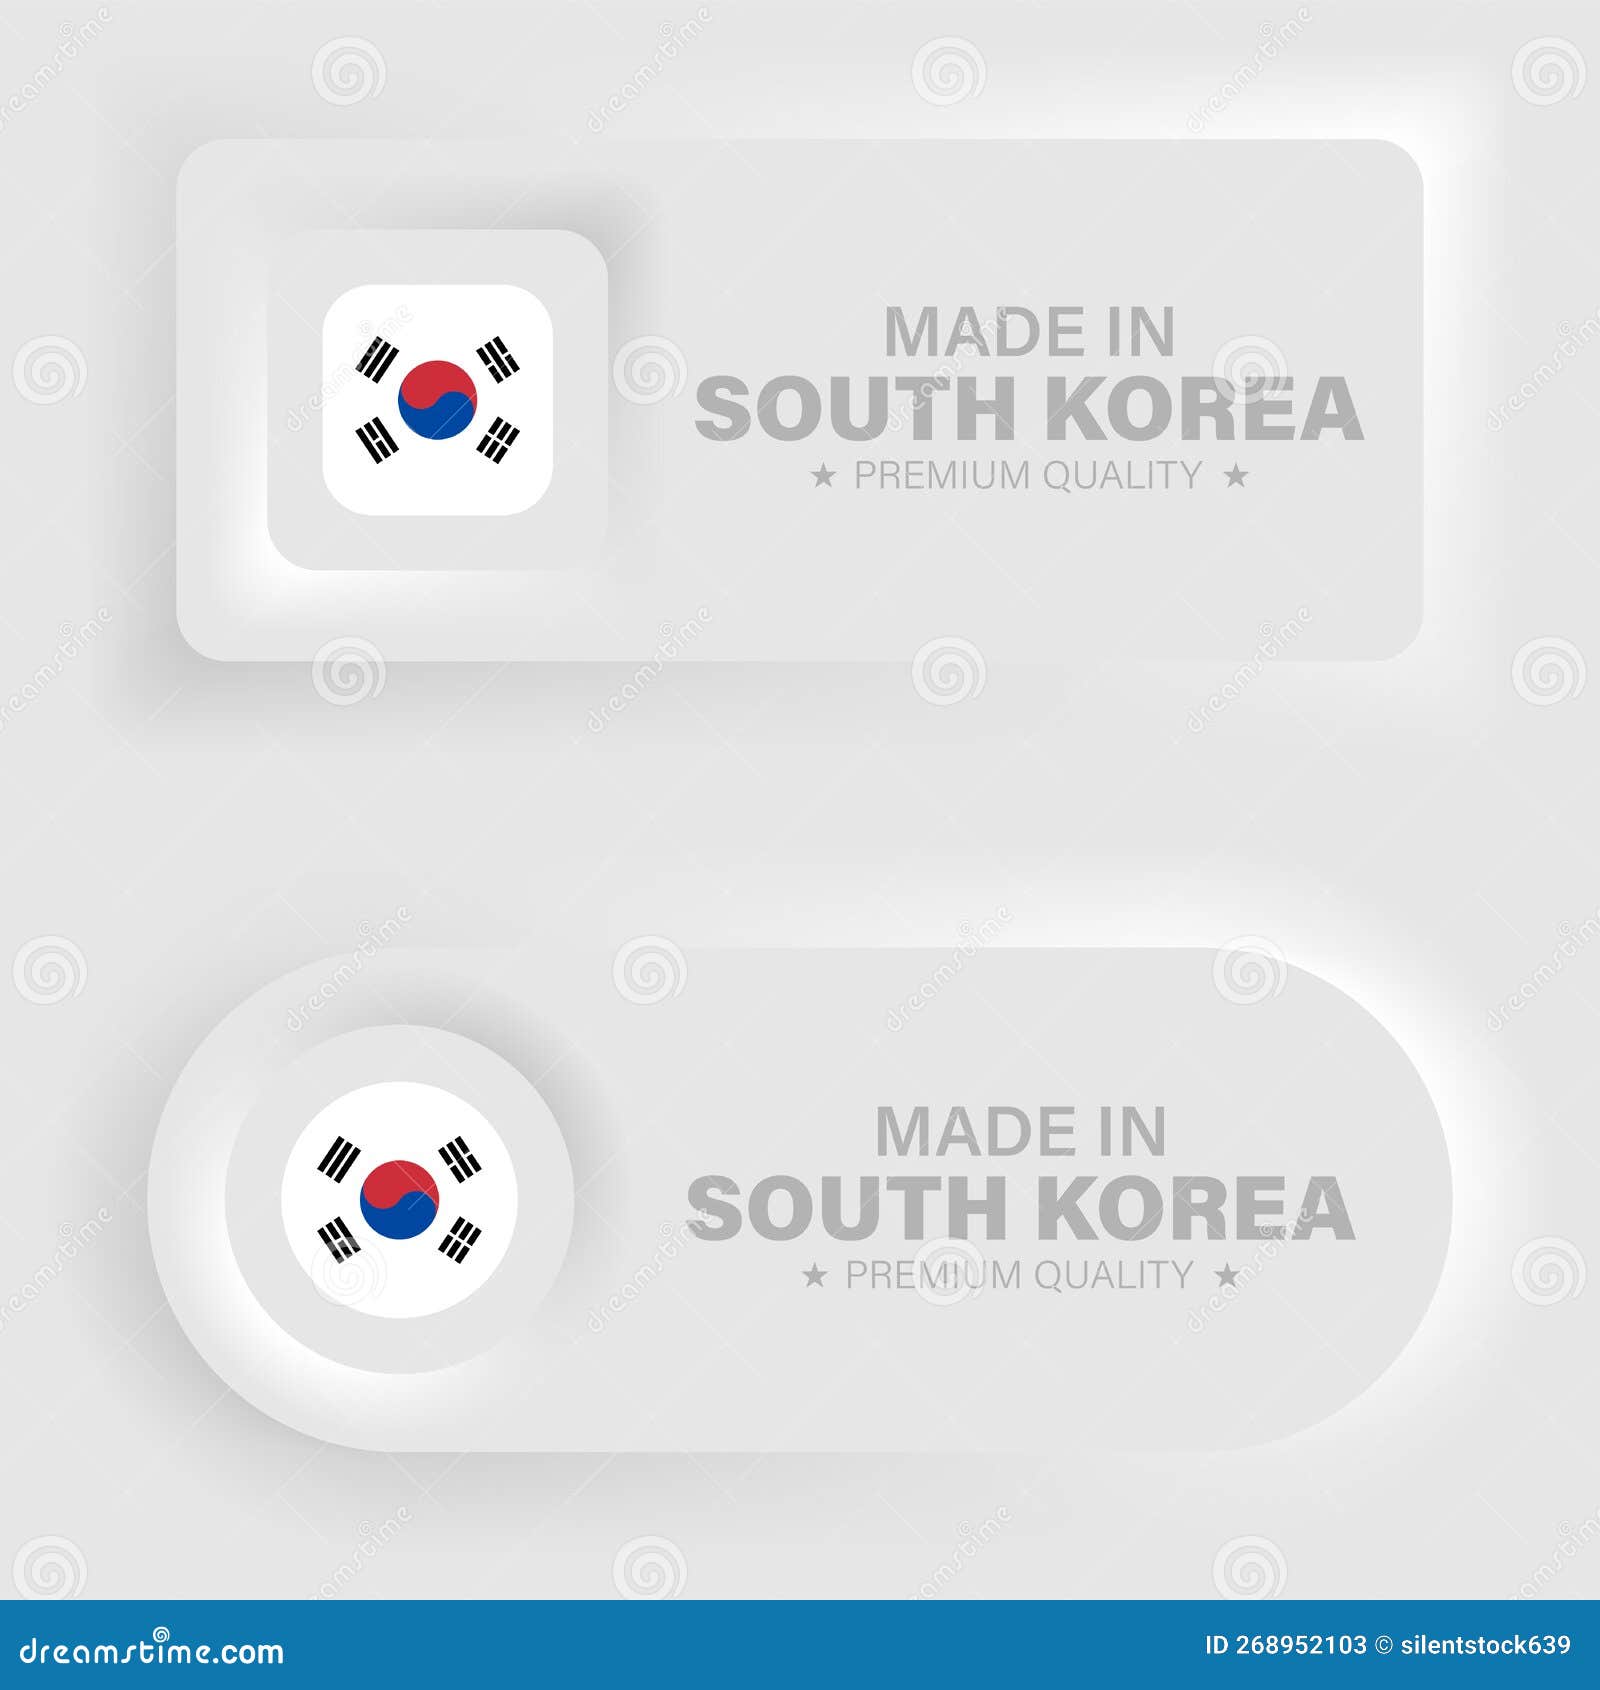 made in southkorea neumorphic graphic and label